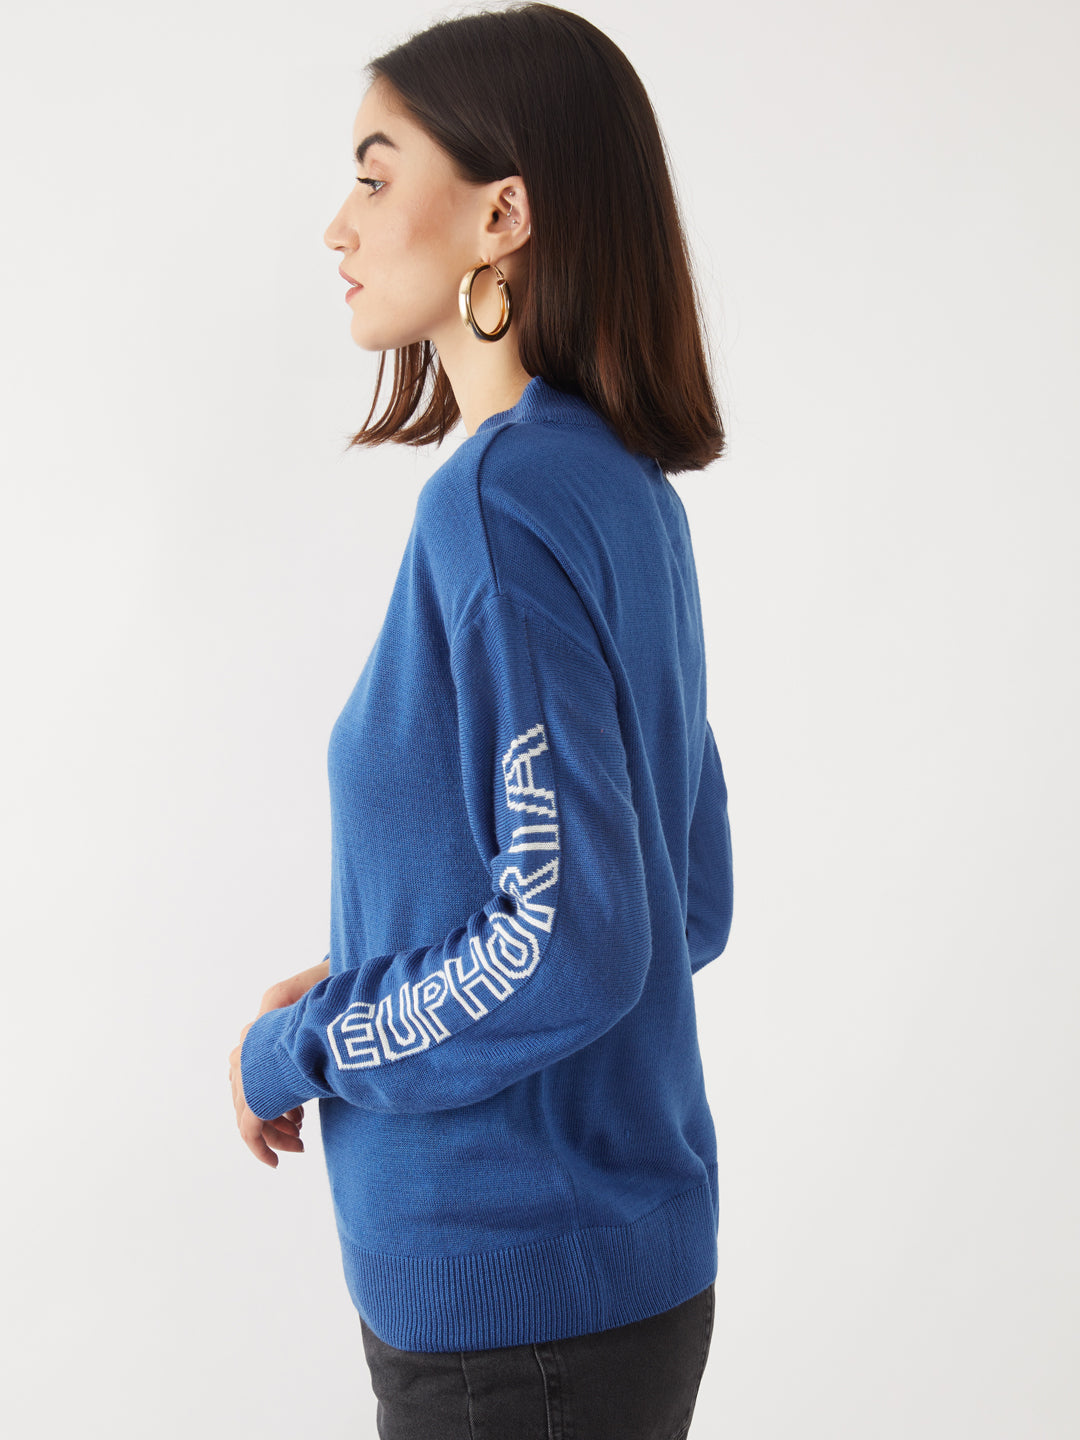 Blue Printed Sweater For Women